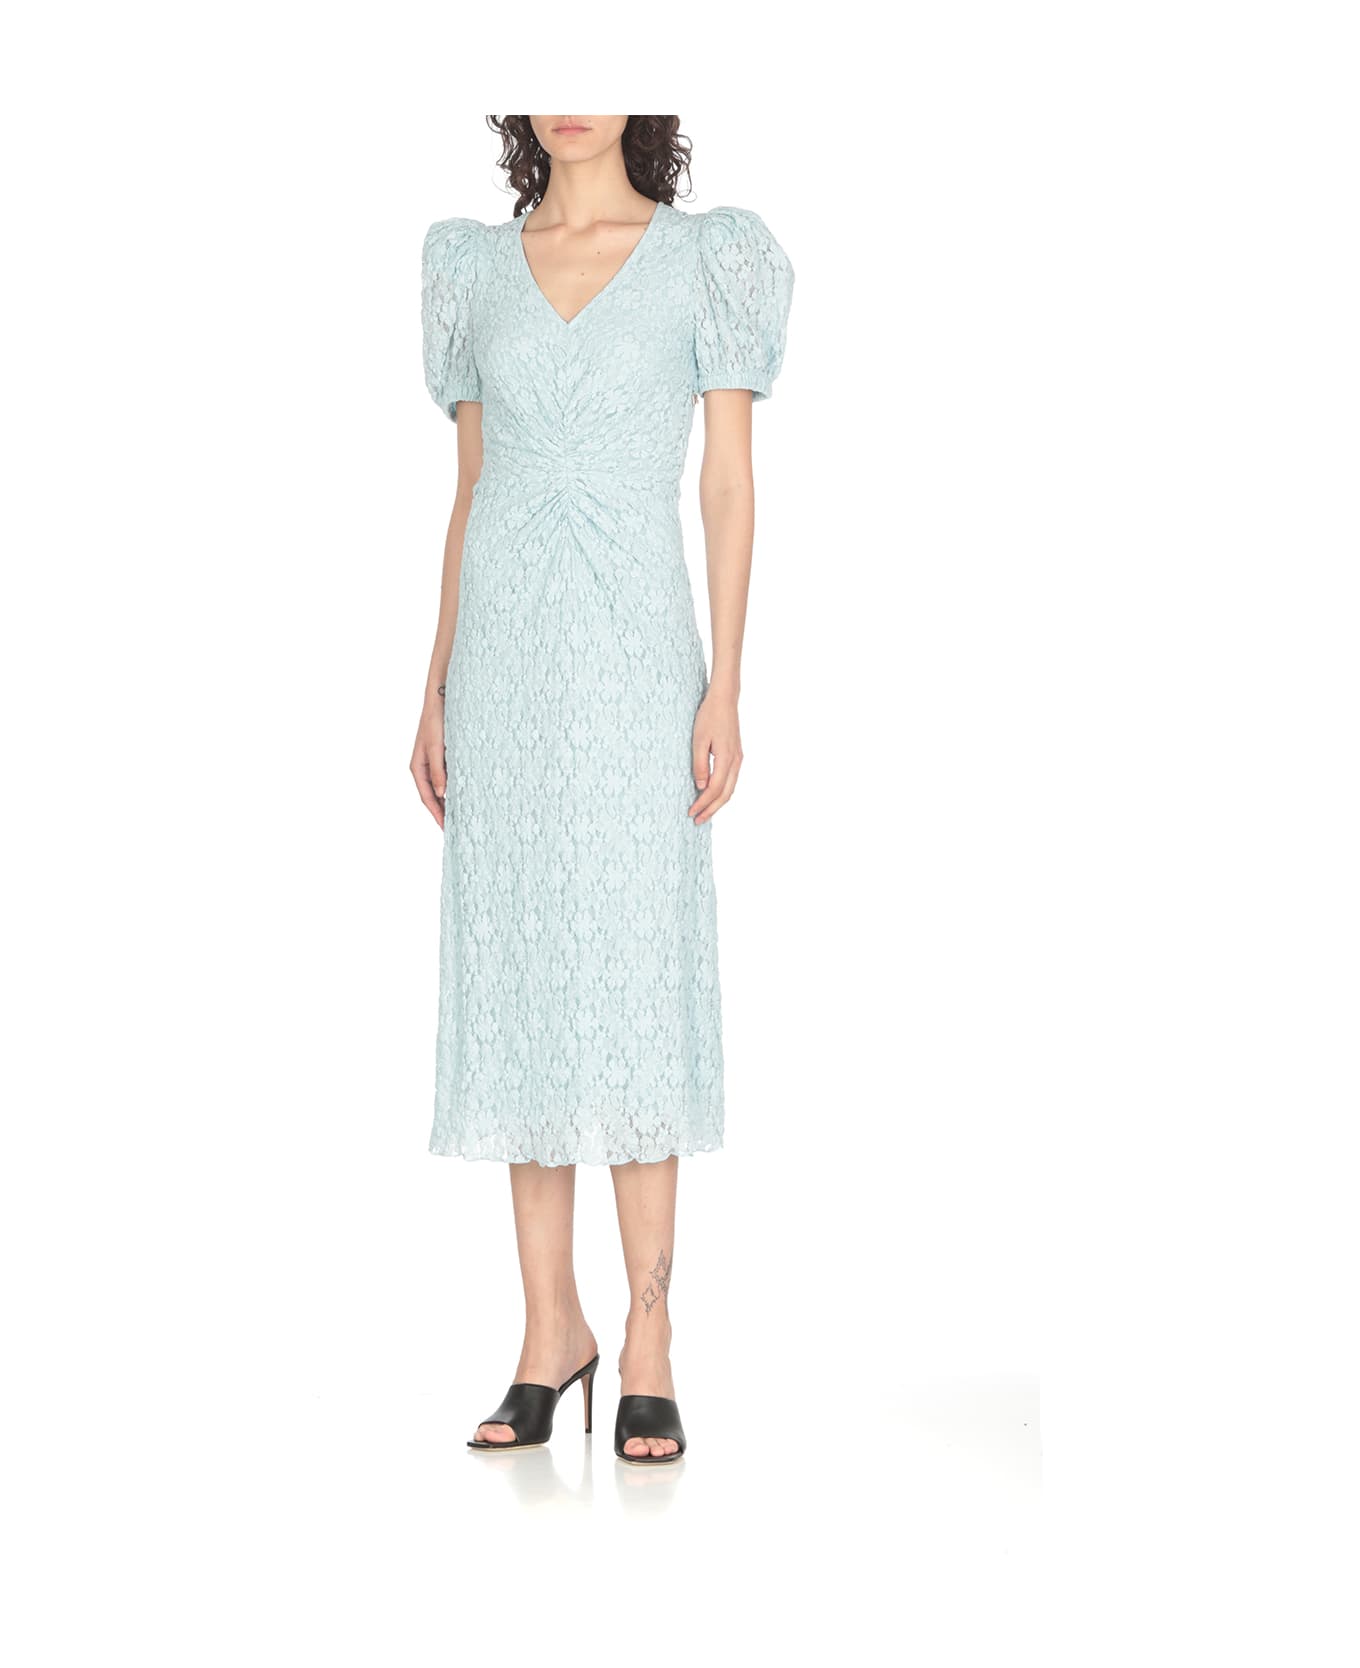 Rotate by Birger Christensen Dress With Embroideries - Light Blue ワンピース＆ドレス